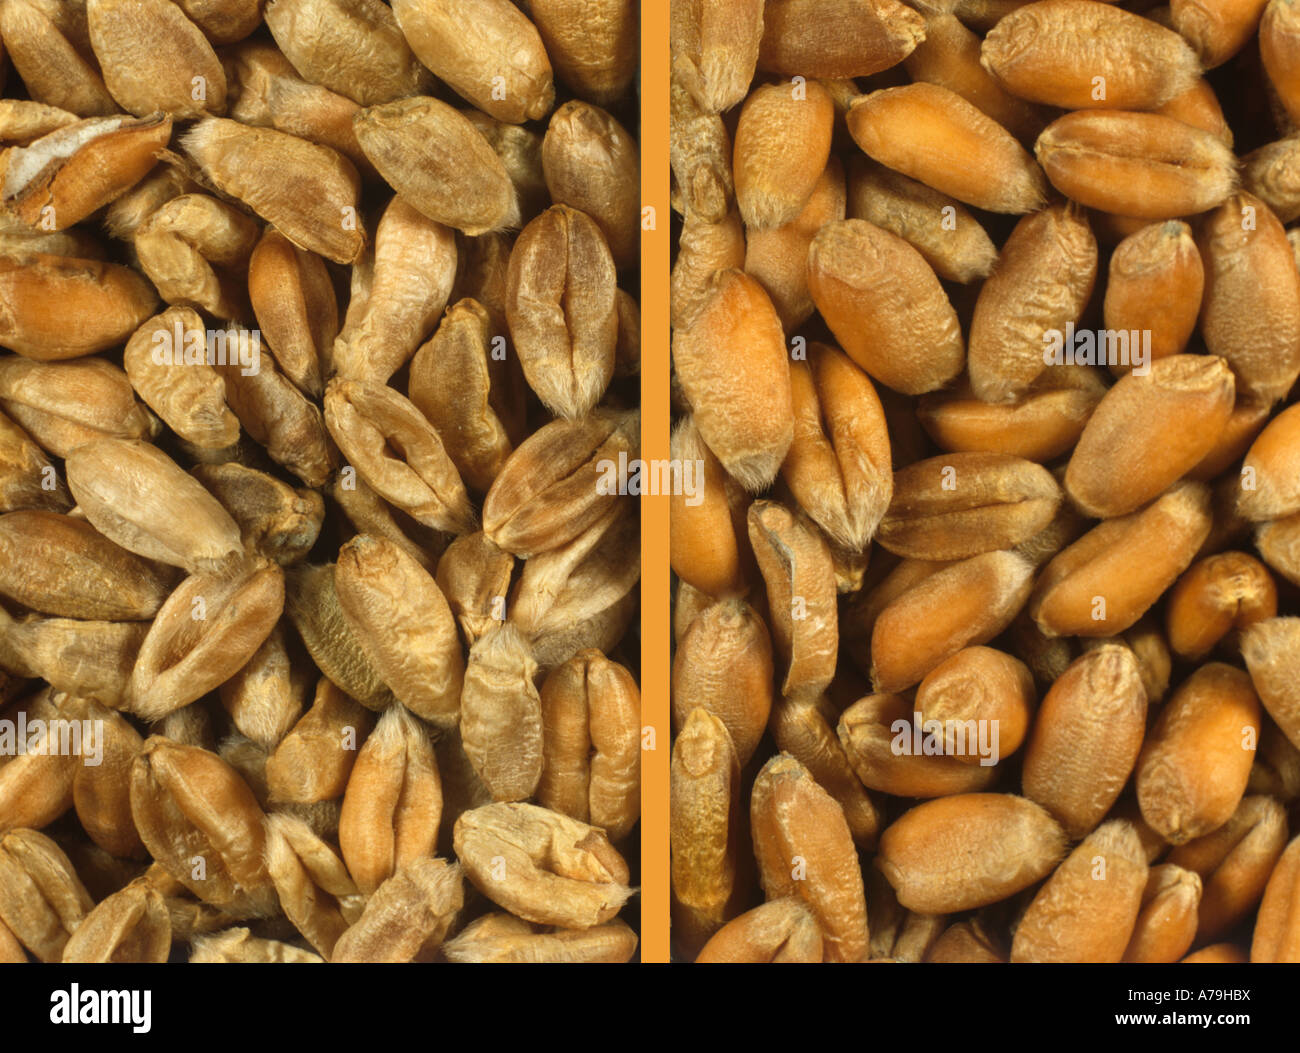 Comparison between diseased shrivelled wheat grain and plump healthy seed Stock Photo